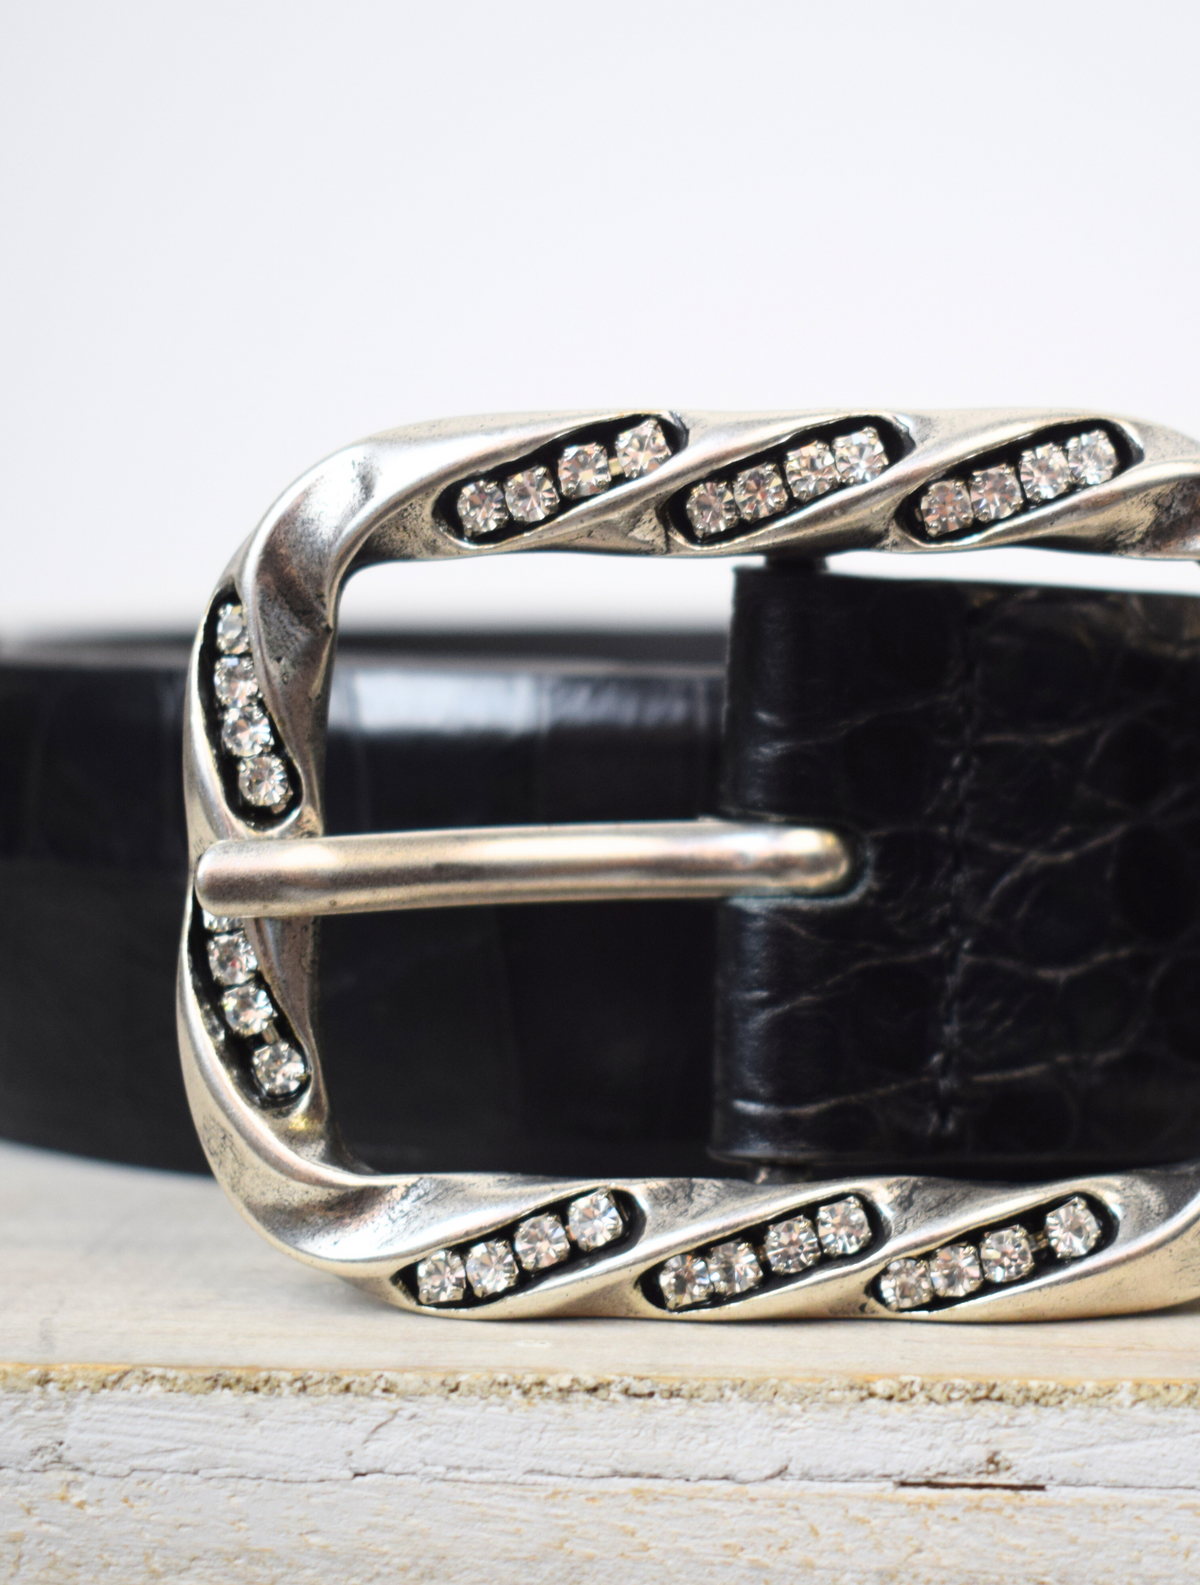 Wide mock croc black leather belt with large silver metallic and bejewelled oblong buckle